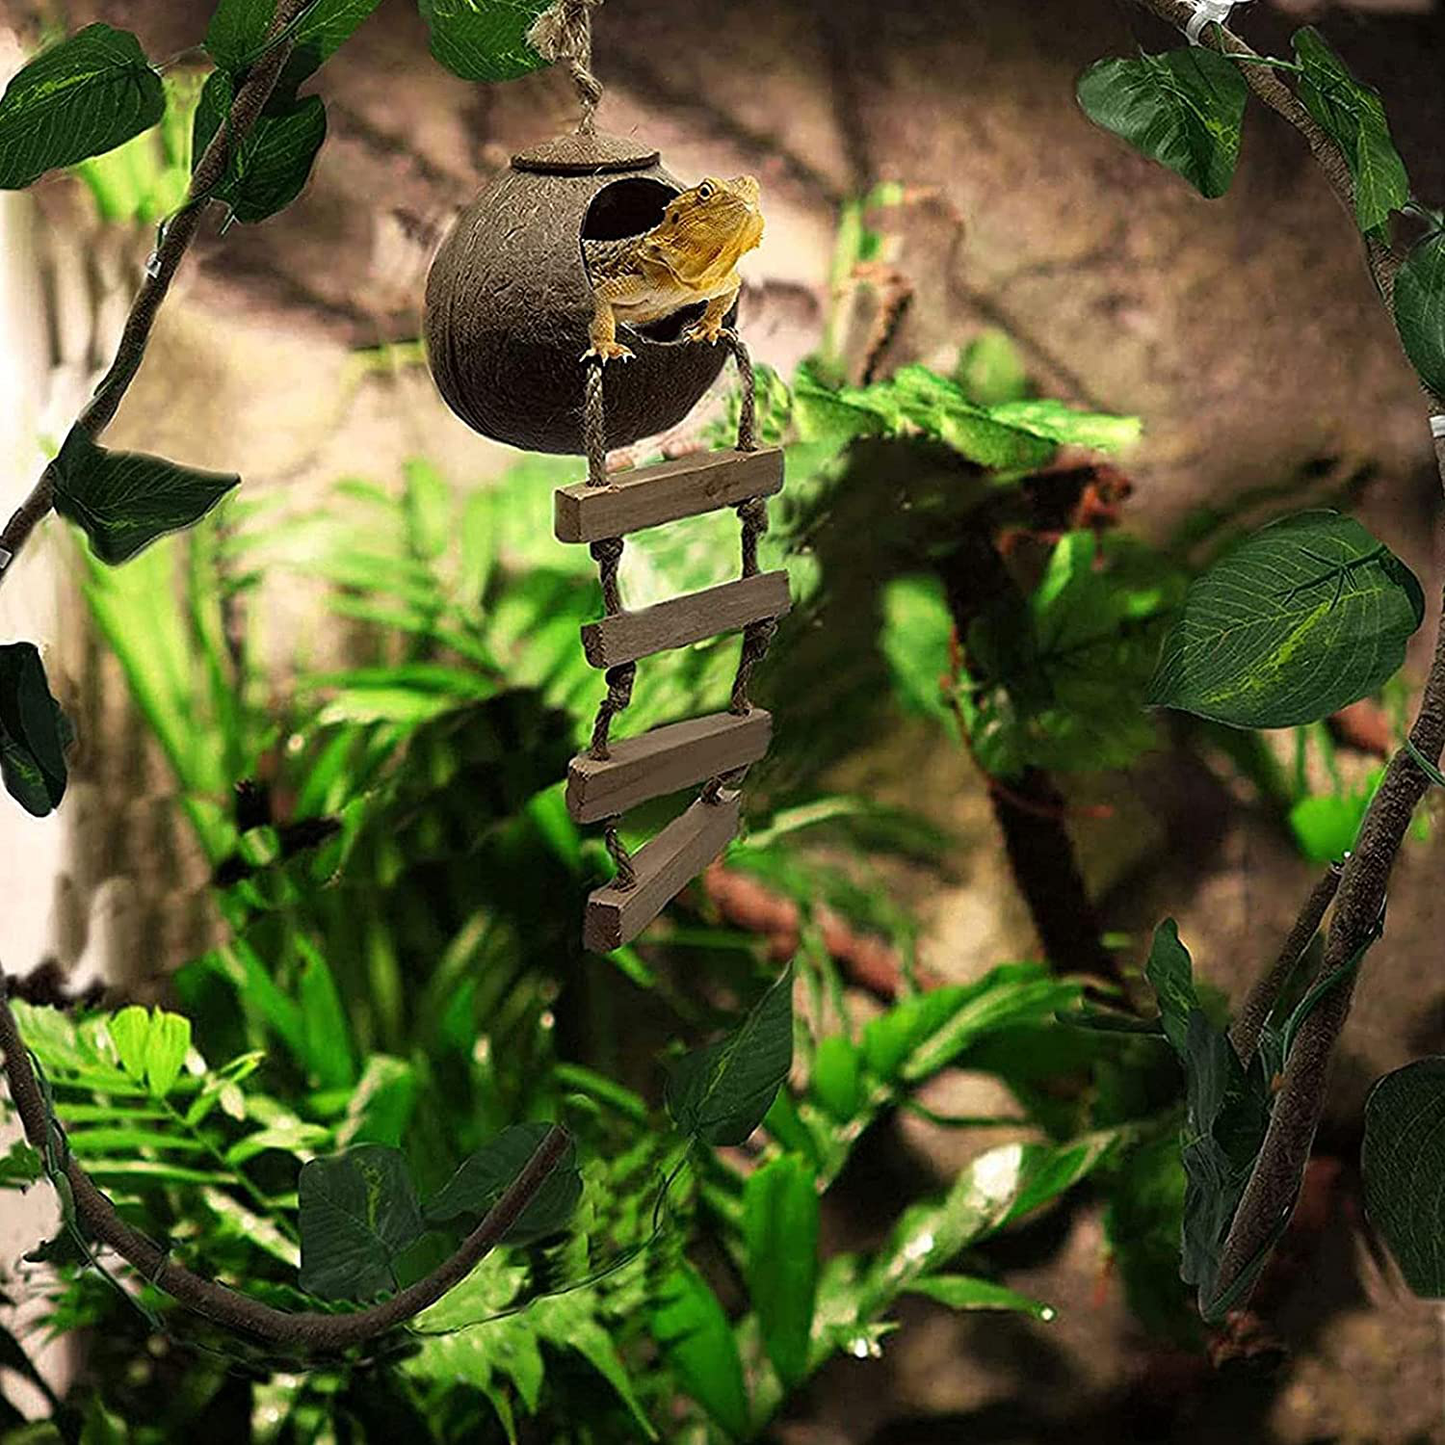 Kathson Lizard Coco Den with Ladder, Reptile Hideouts Gecko Coconut Husk Hut with Artificial Bendable Jungle Climbing Vines for Chameleon, Lizards, Gecko, Snakes to Hide Perch and Play